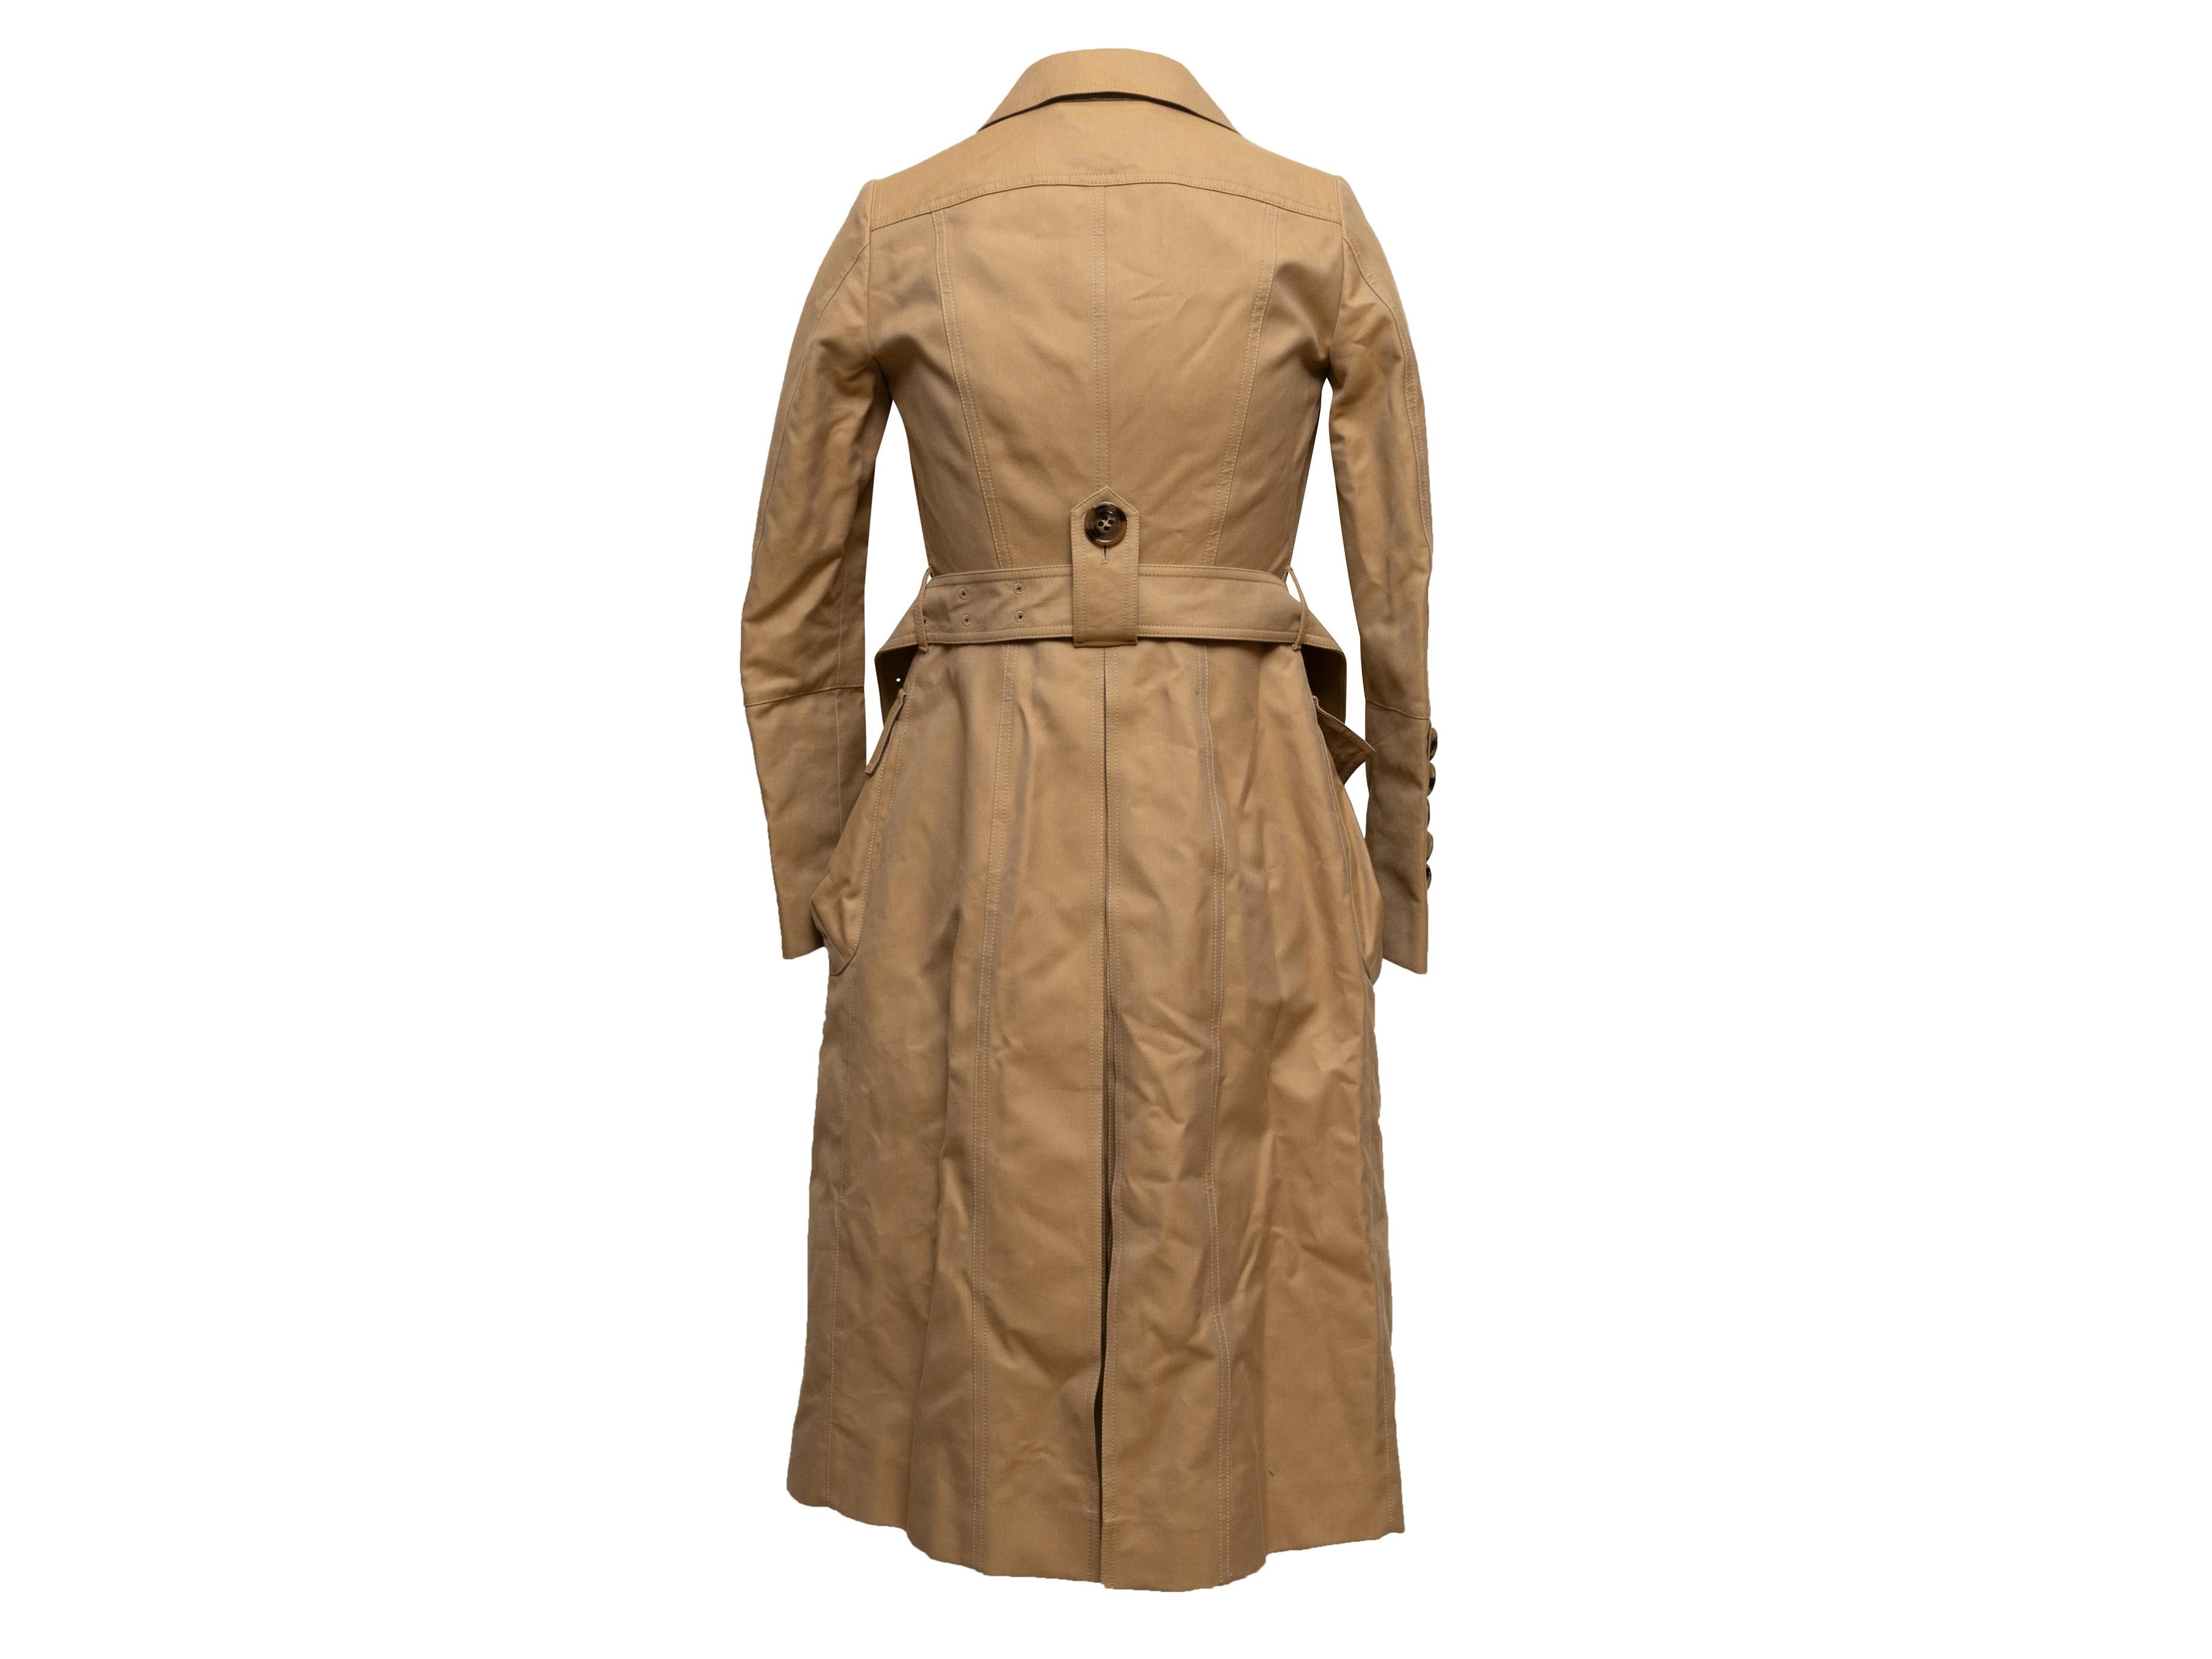 Tan Burberry Prorsum Belted Trench Coat Size EU 34 For Sale 1